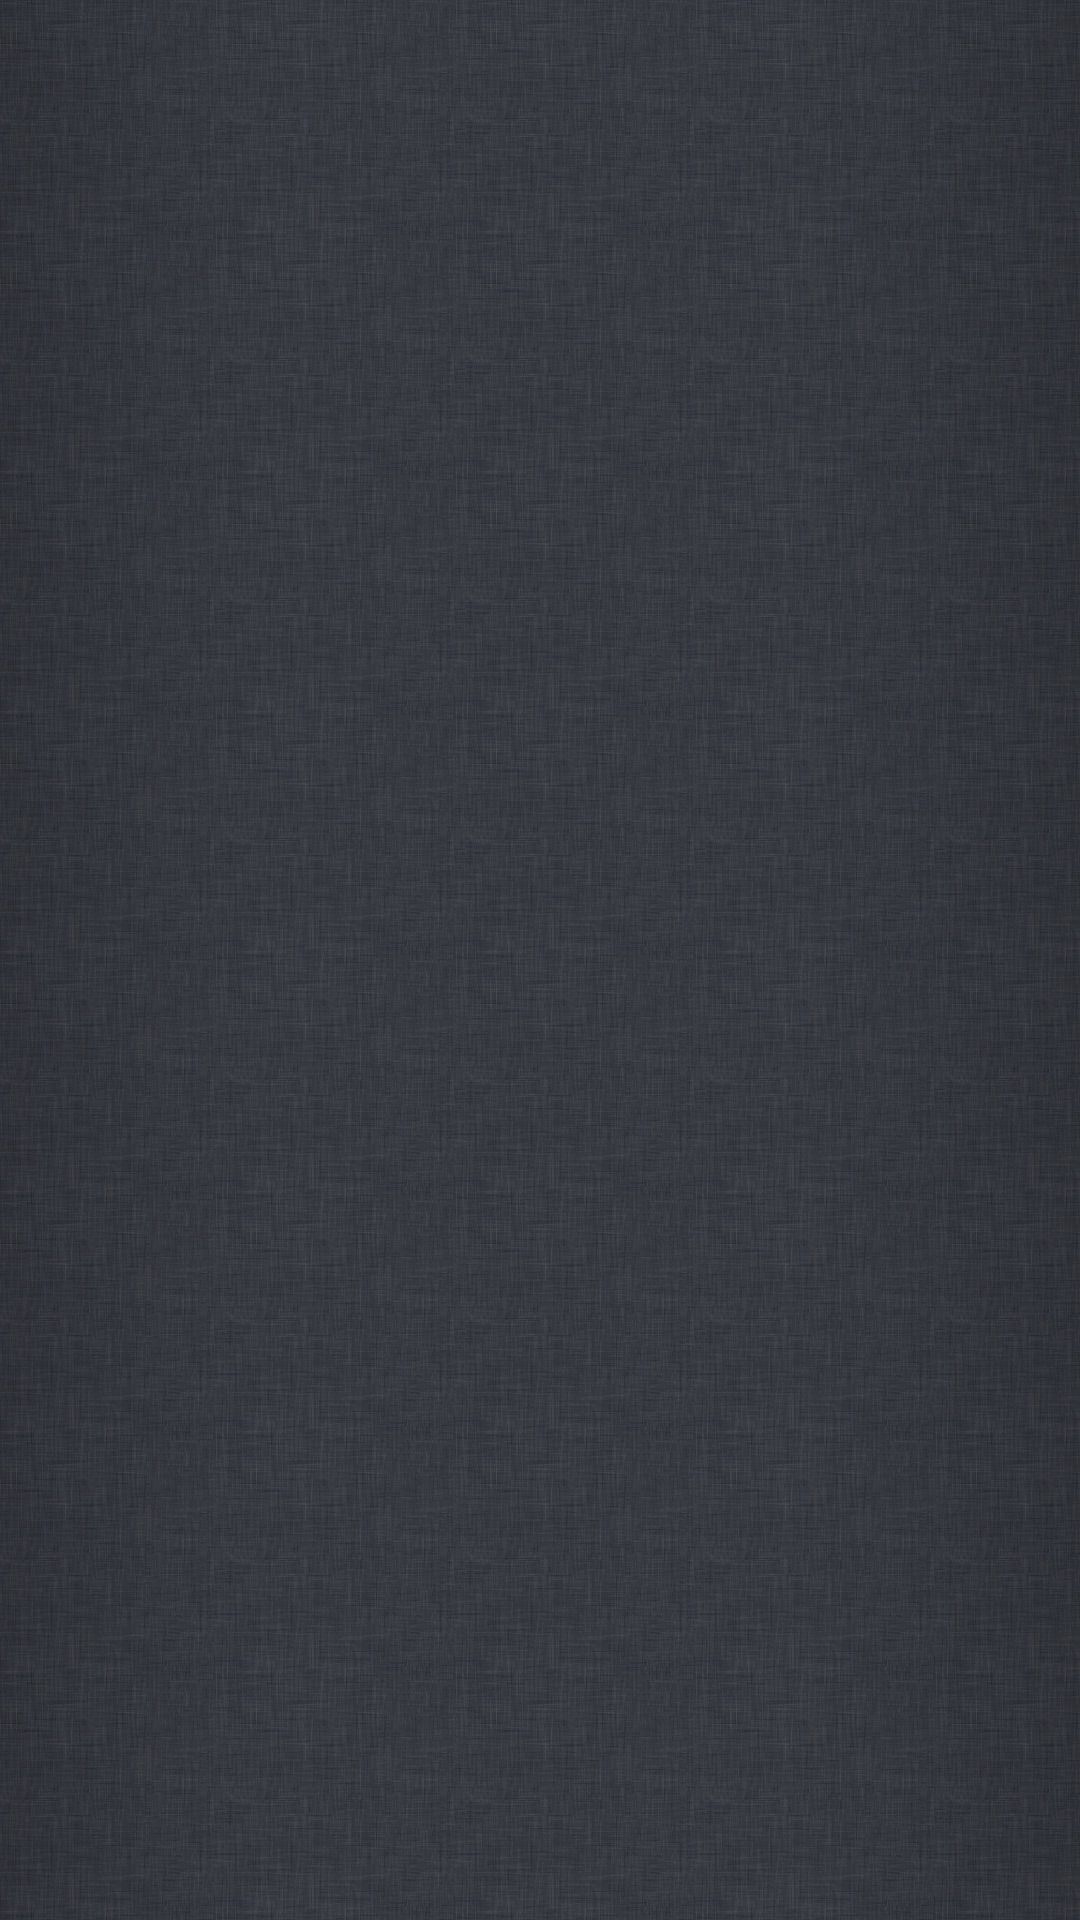 Simple Gray Iphone Wallpapers